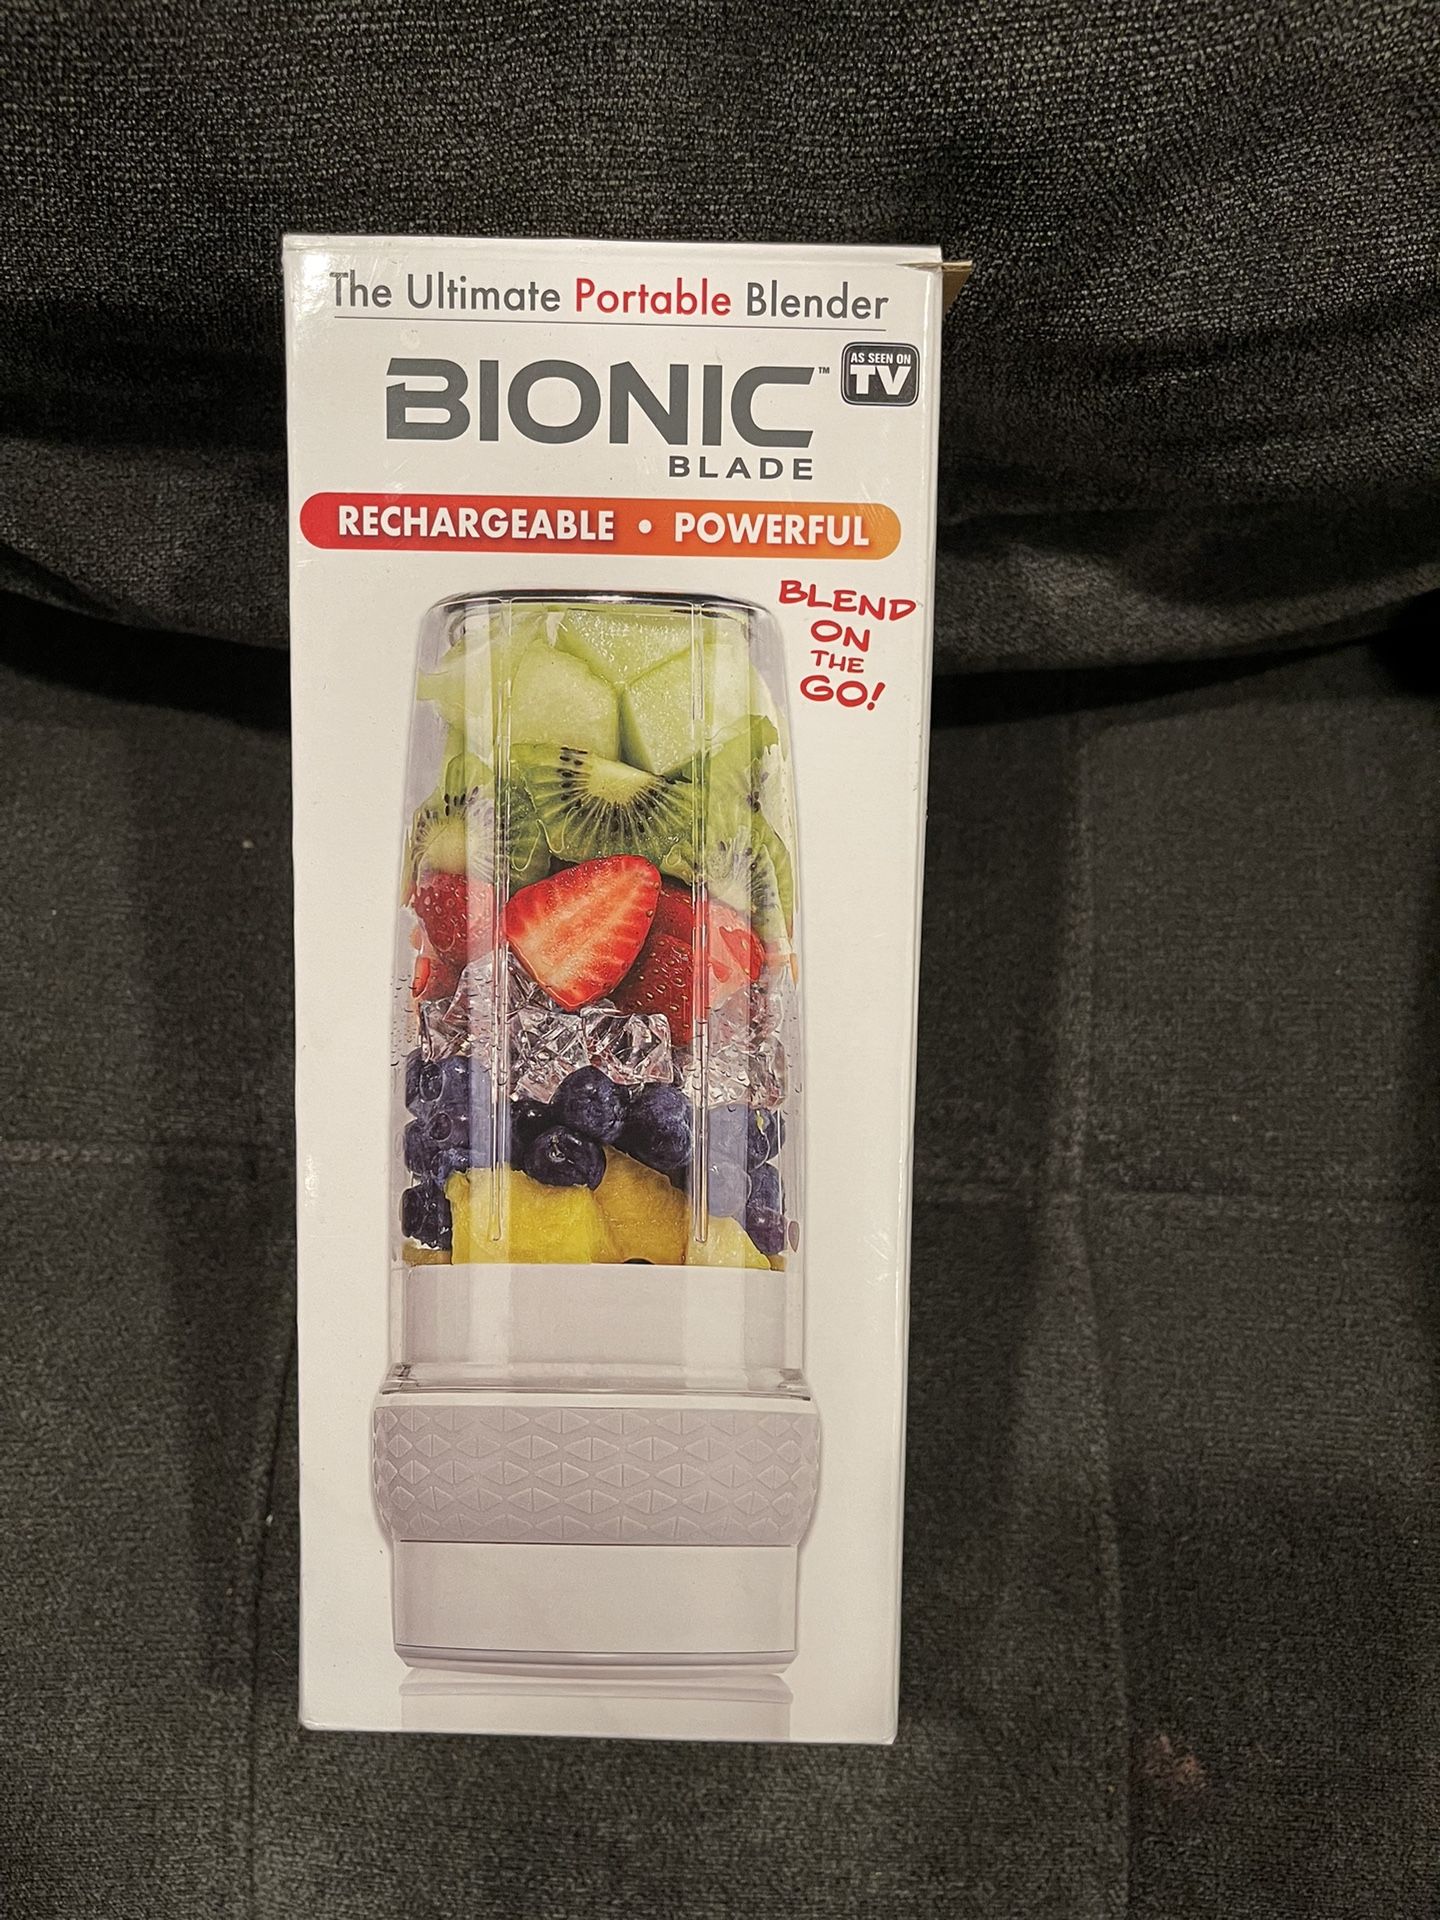 Bionic Blade Personal-Sized Blender for Sale in Los Angeles, CA - OfferUp